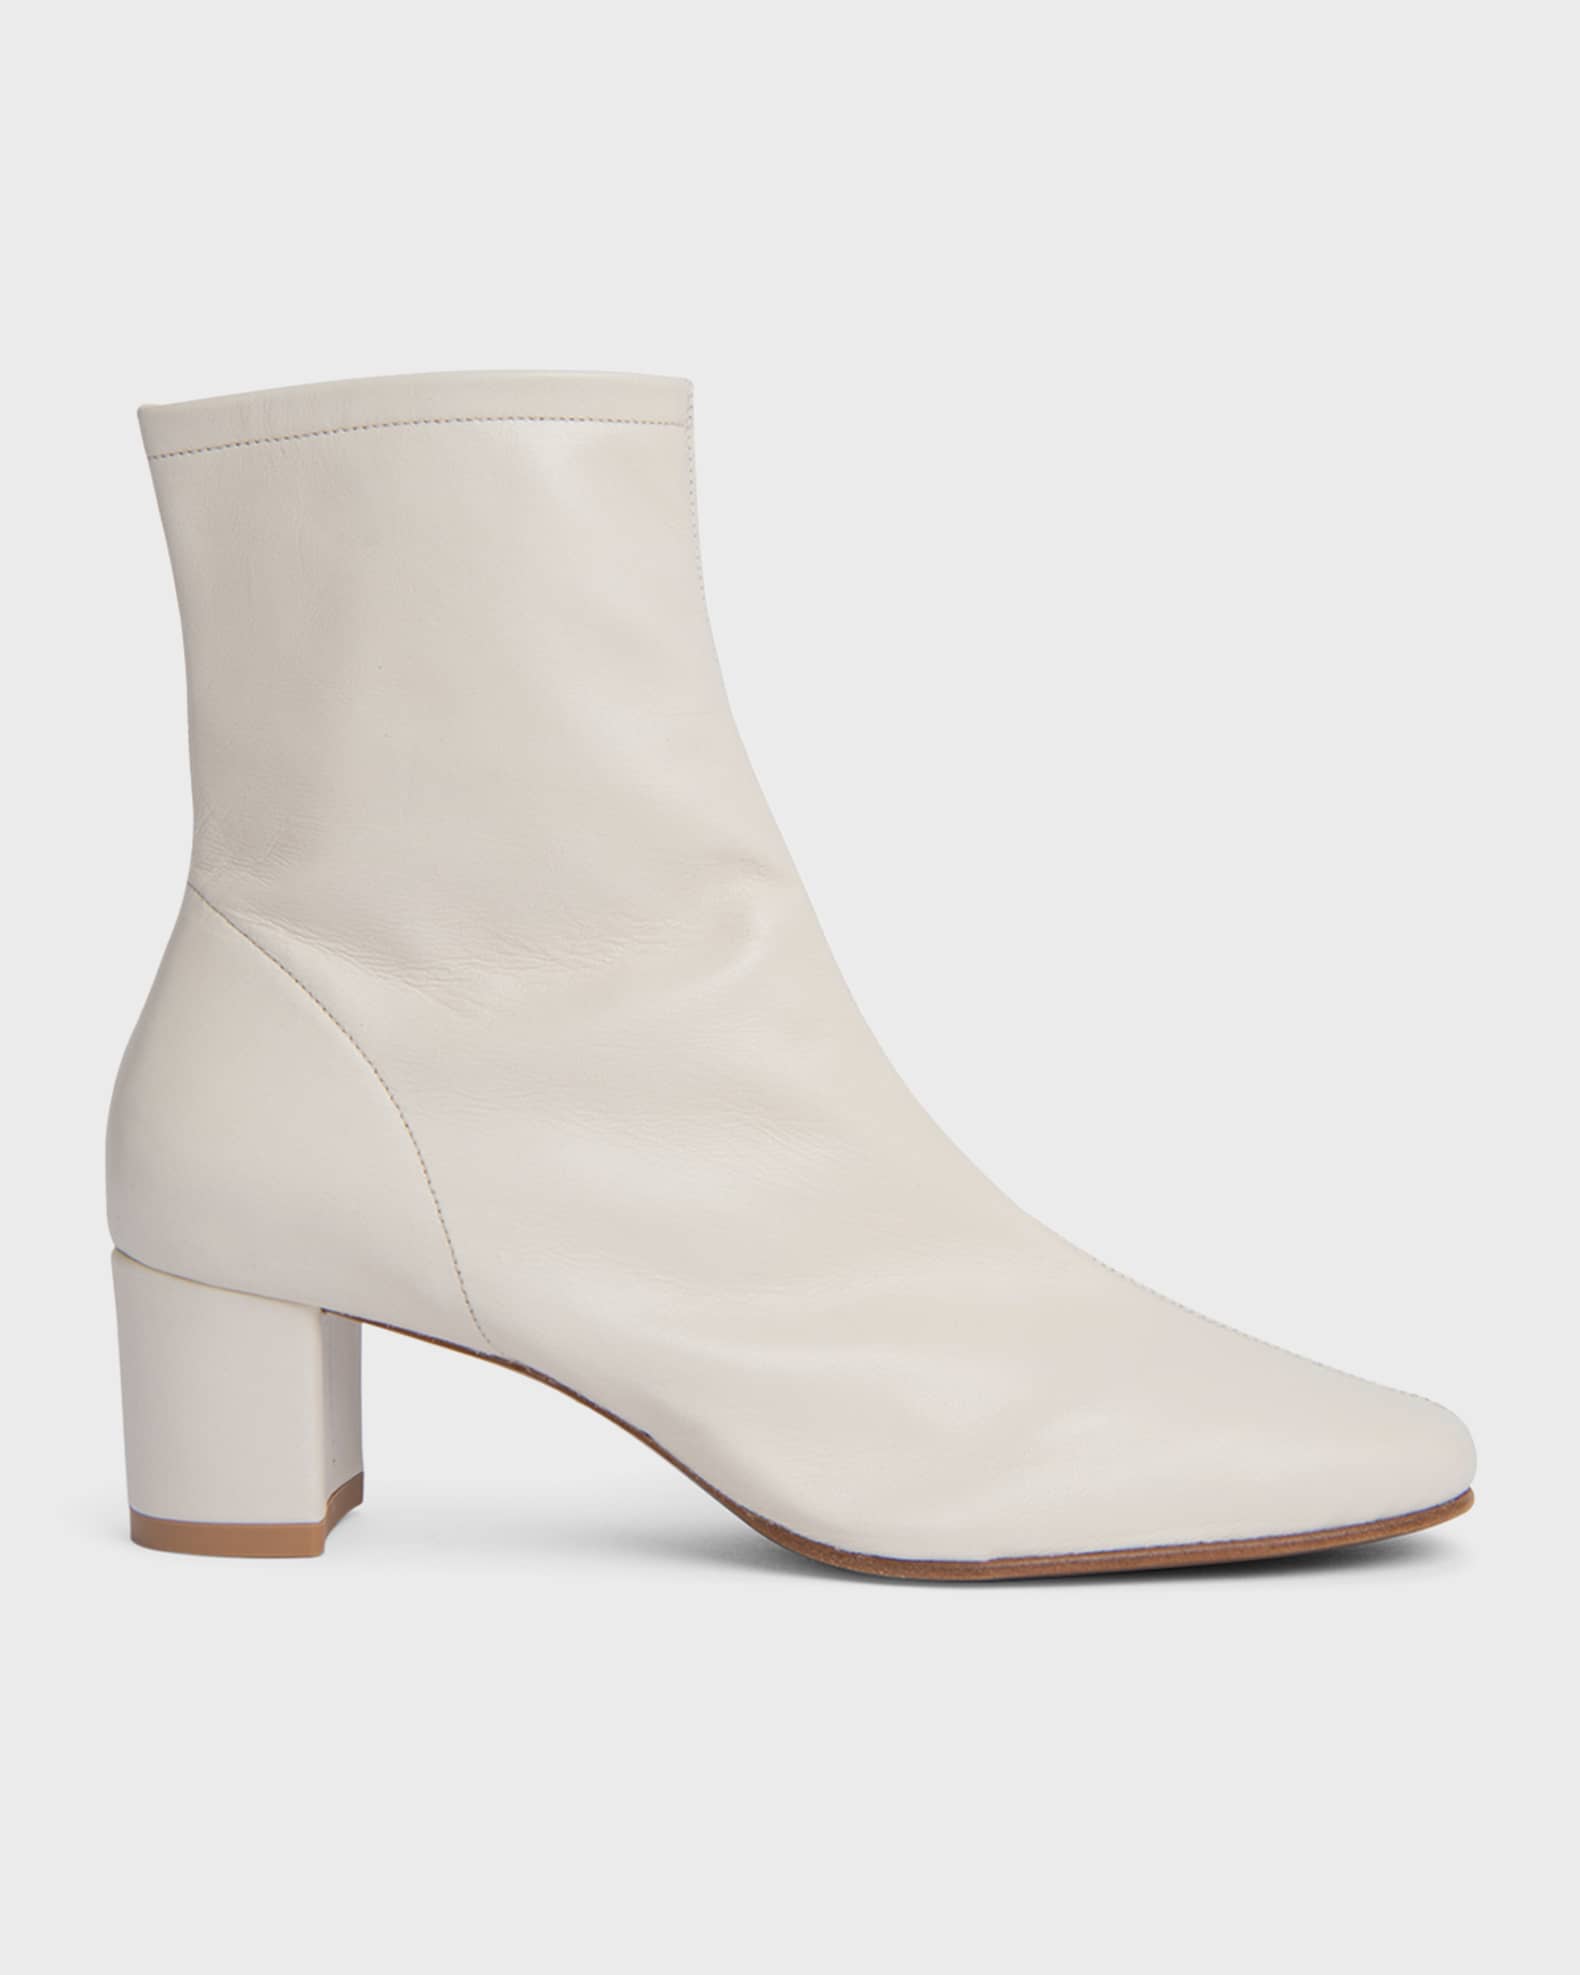 BY FAR Sofia Leather Ankle Booties | Neiman Marcus